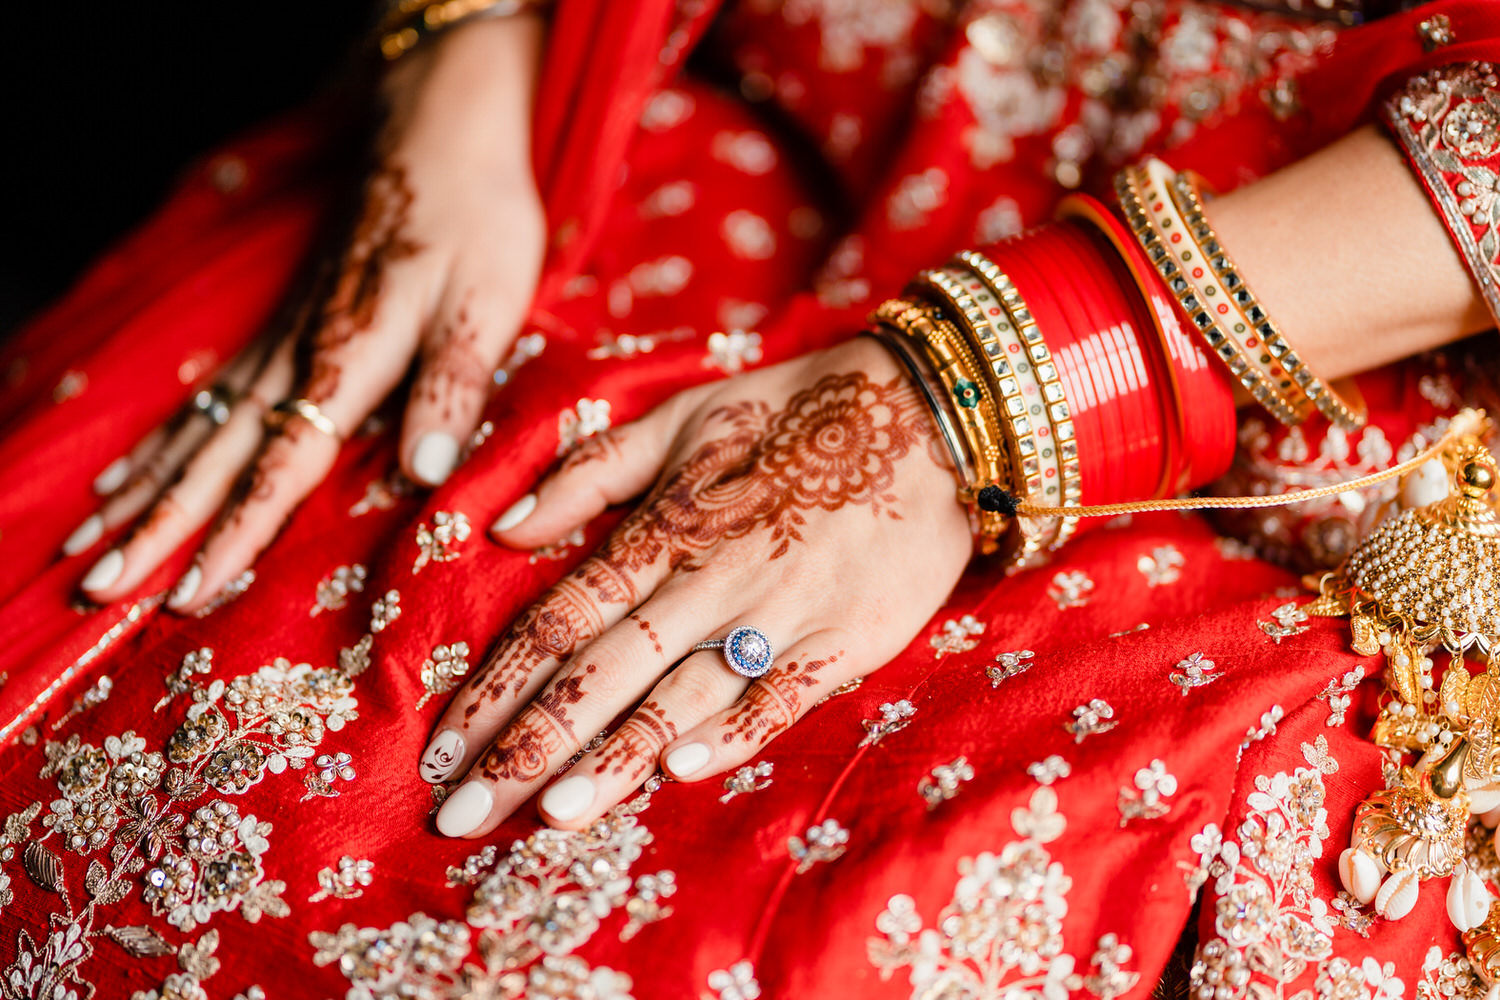 a close up of a woman's hands with henna and jewelry.